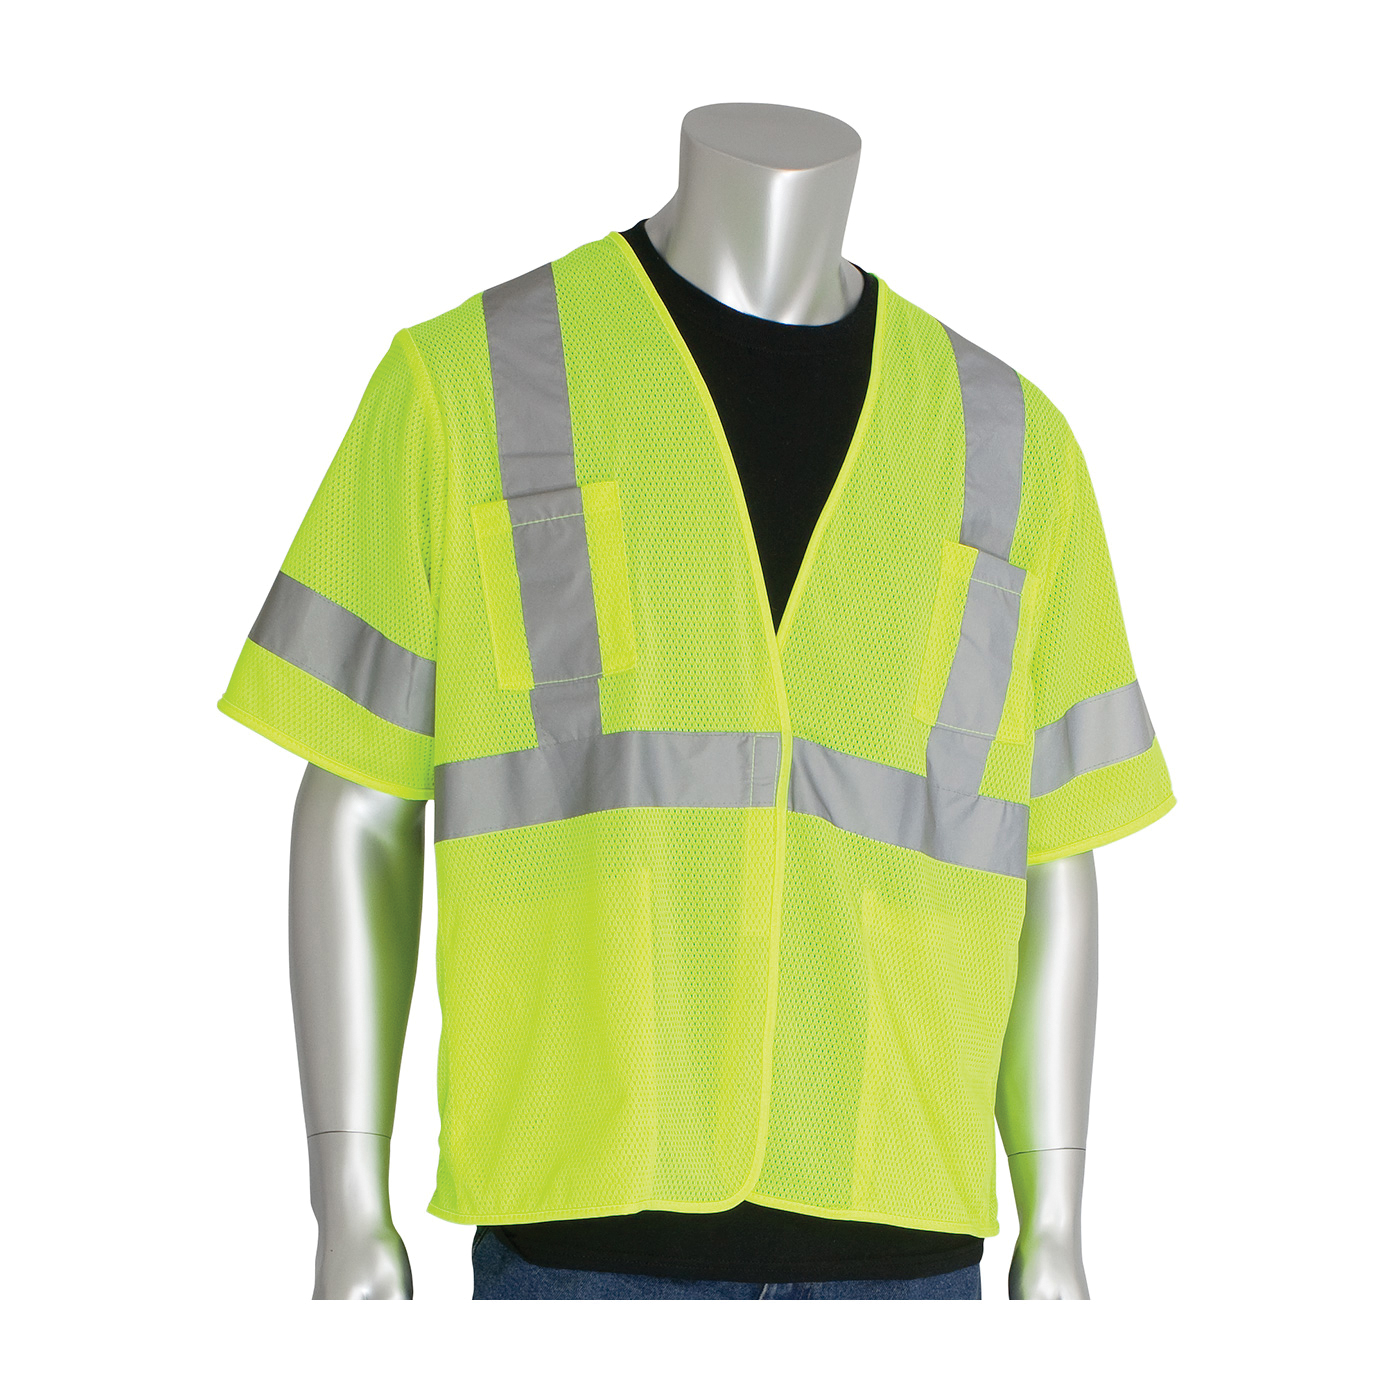 PIP® 303-HSVELY-5X Safety Vest, 5XL, Hi-Viz Lime Yellow, Polyester Mesh, Hook and Loop Closure, 4 Pockets, ANSI Class: Class 3, ANSI 107 Type R